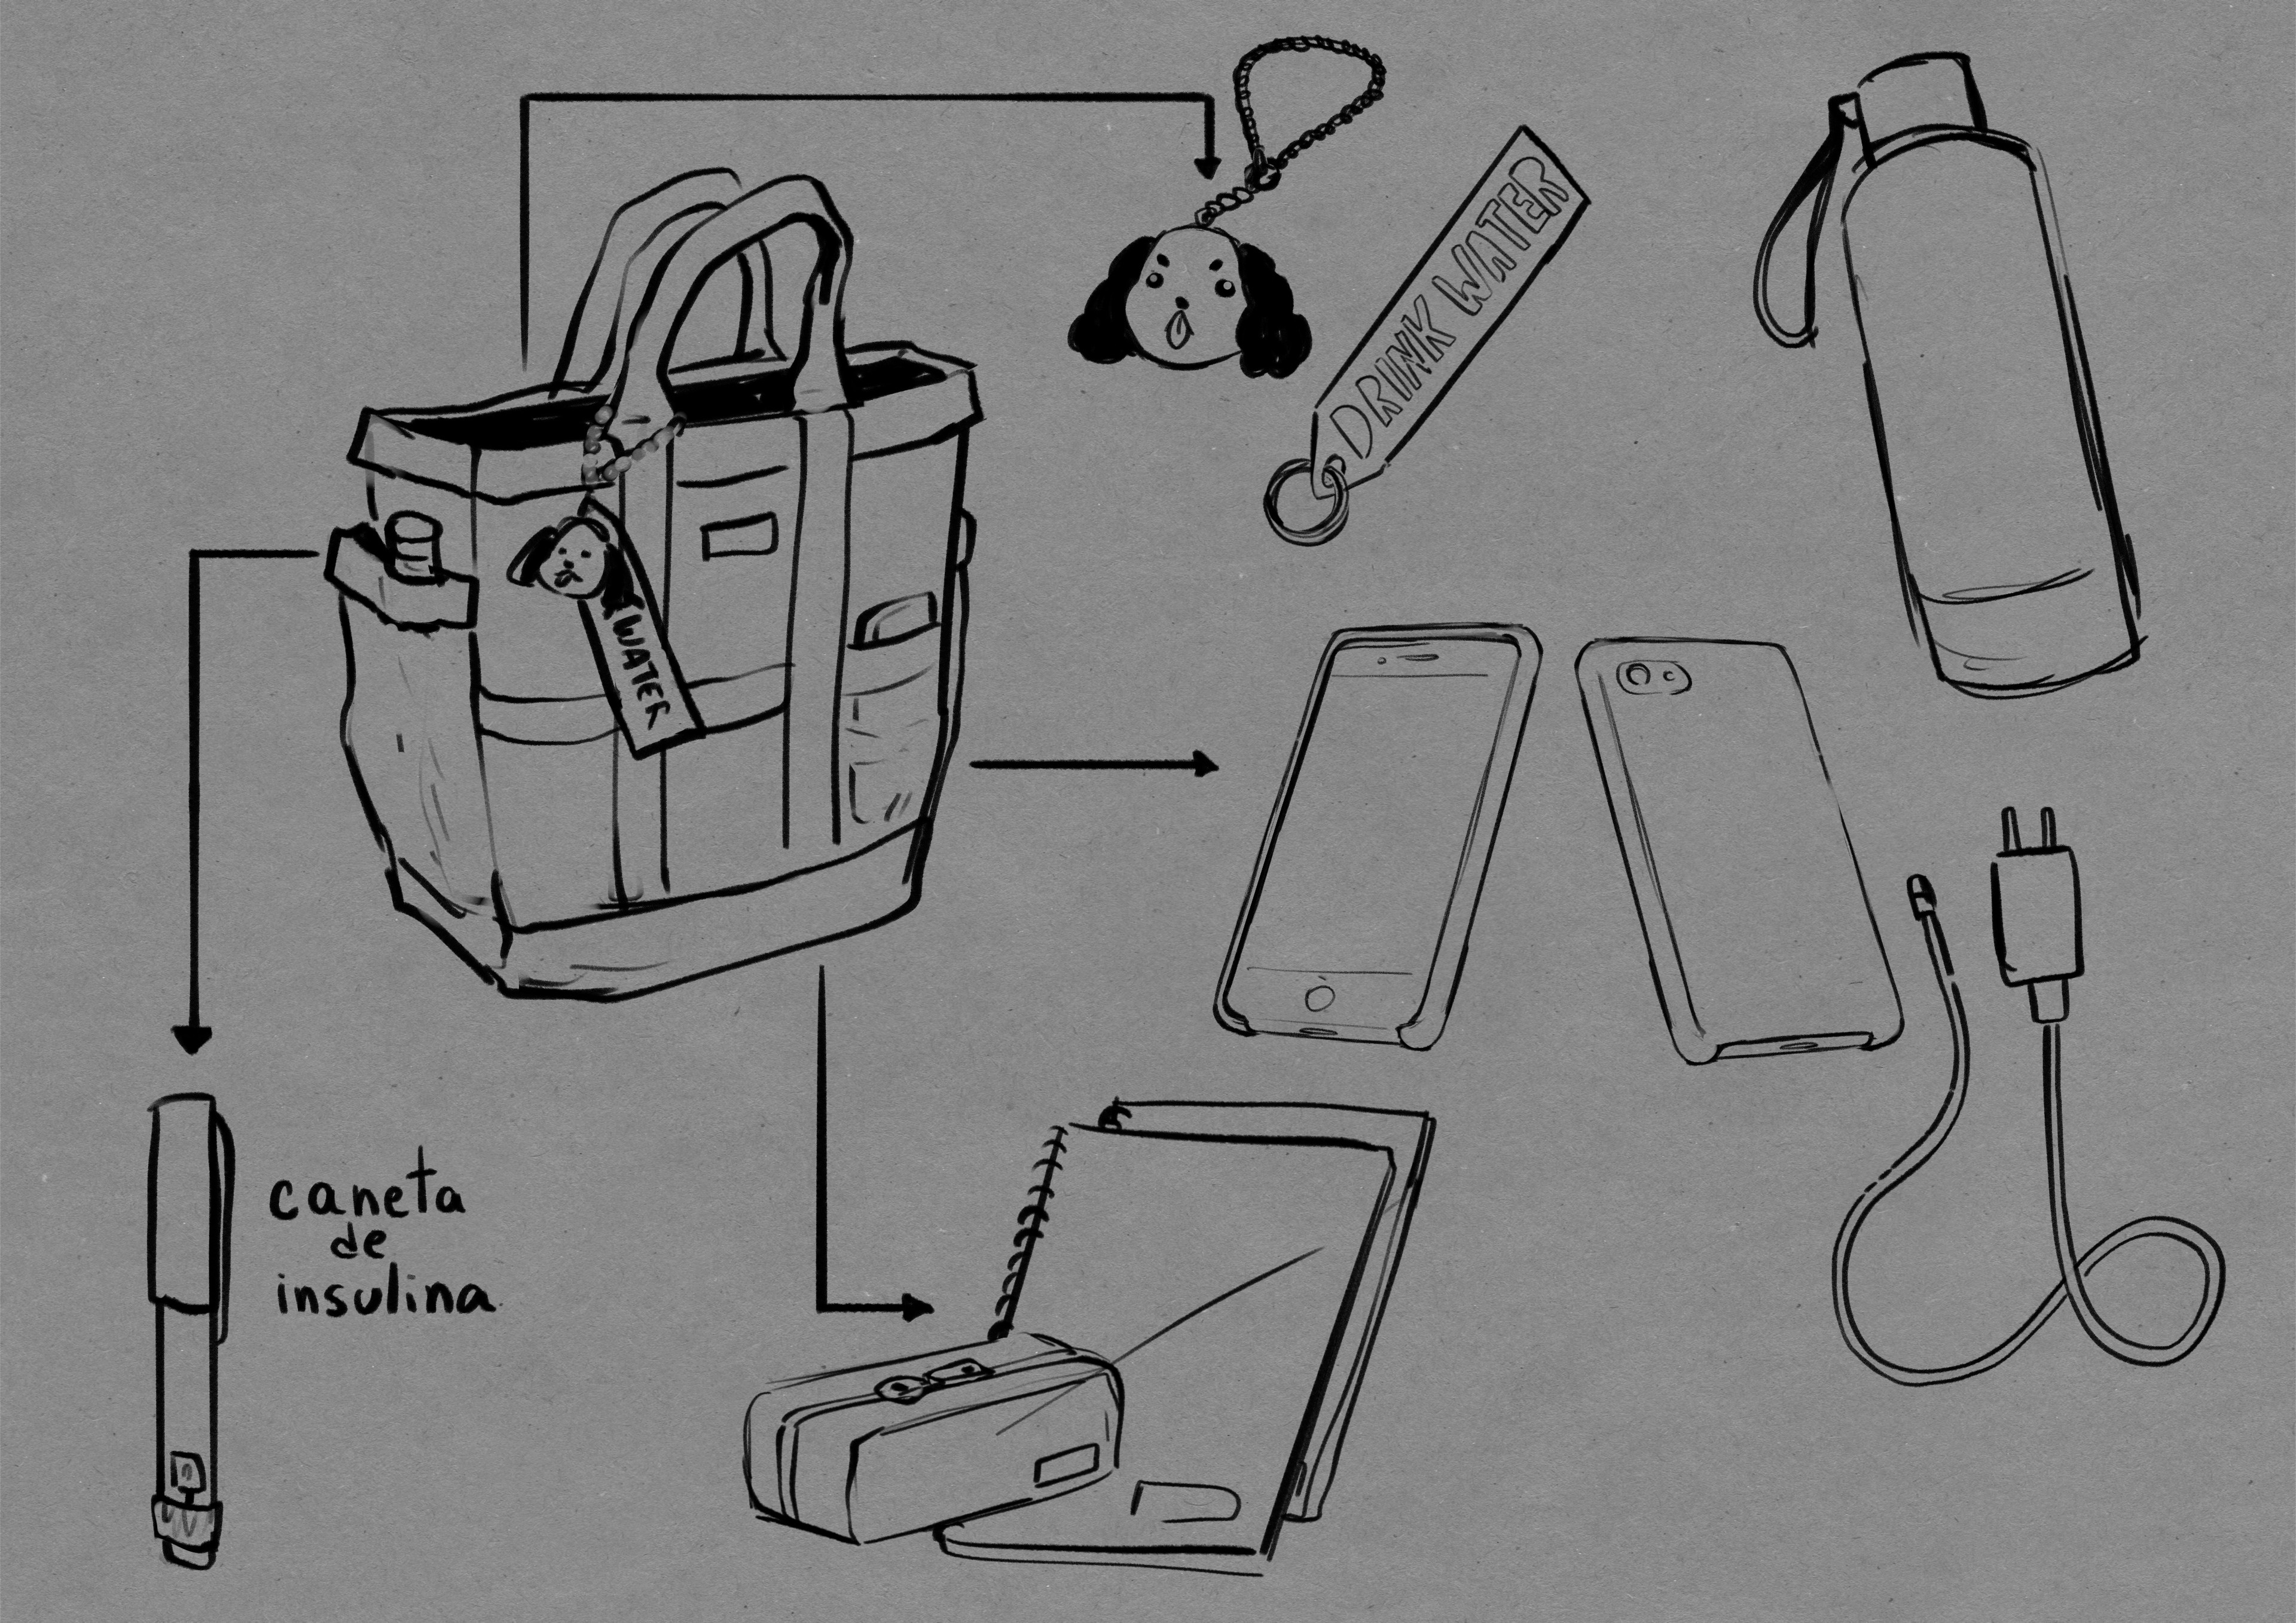 Sketch of Ana’s bag, I think you can tell a lot about a person based on their bag, phone case etc. This was me trying to get to know them better